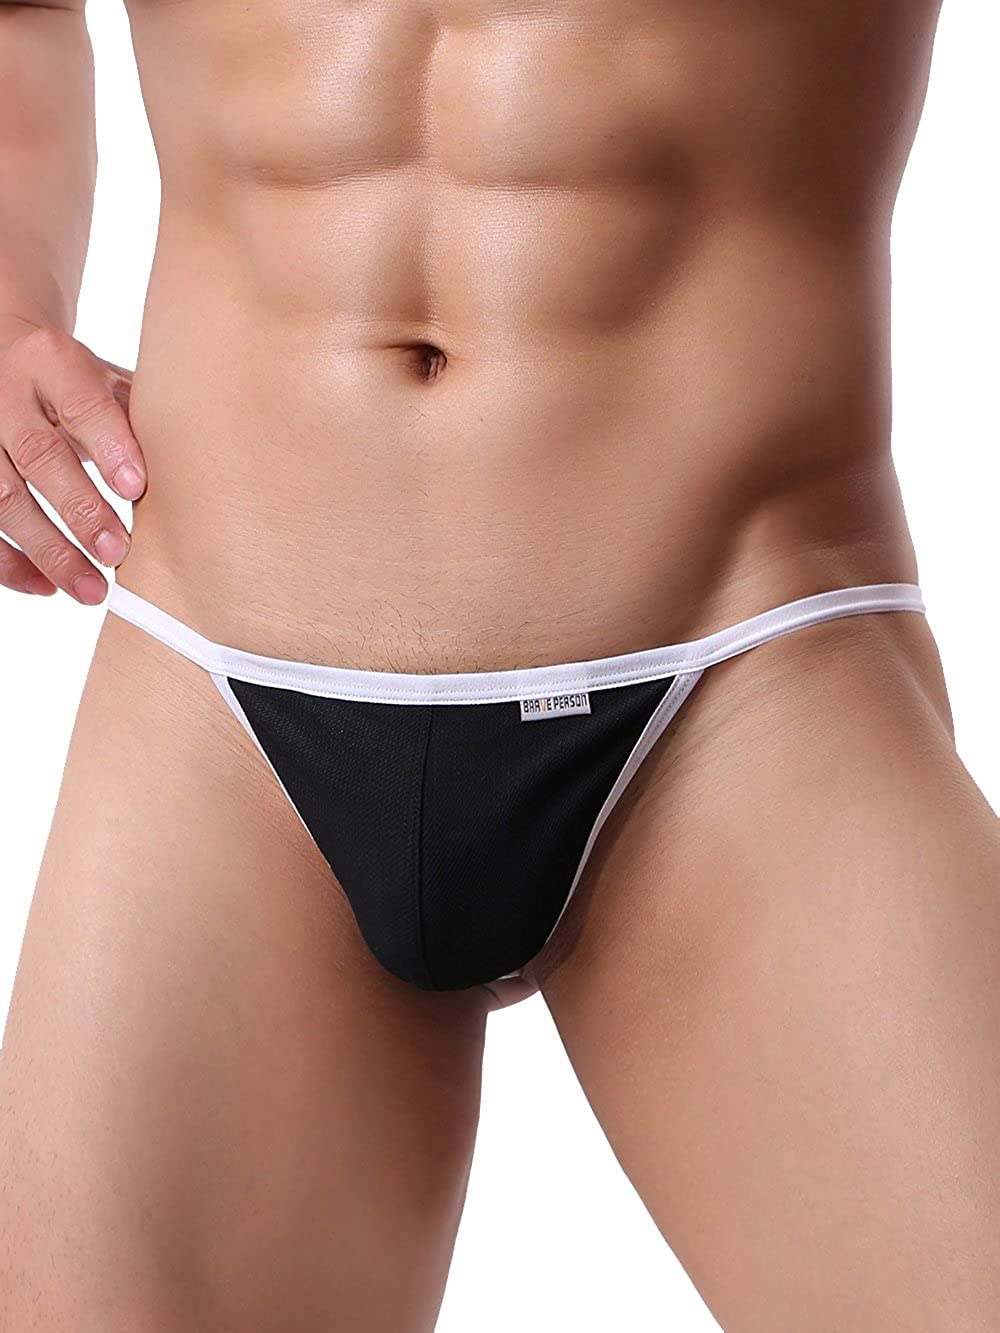 Ikingsky Men S Pouch G String Underwear Sexy Low Rise String Thong